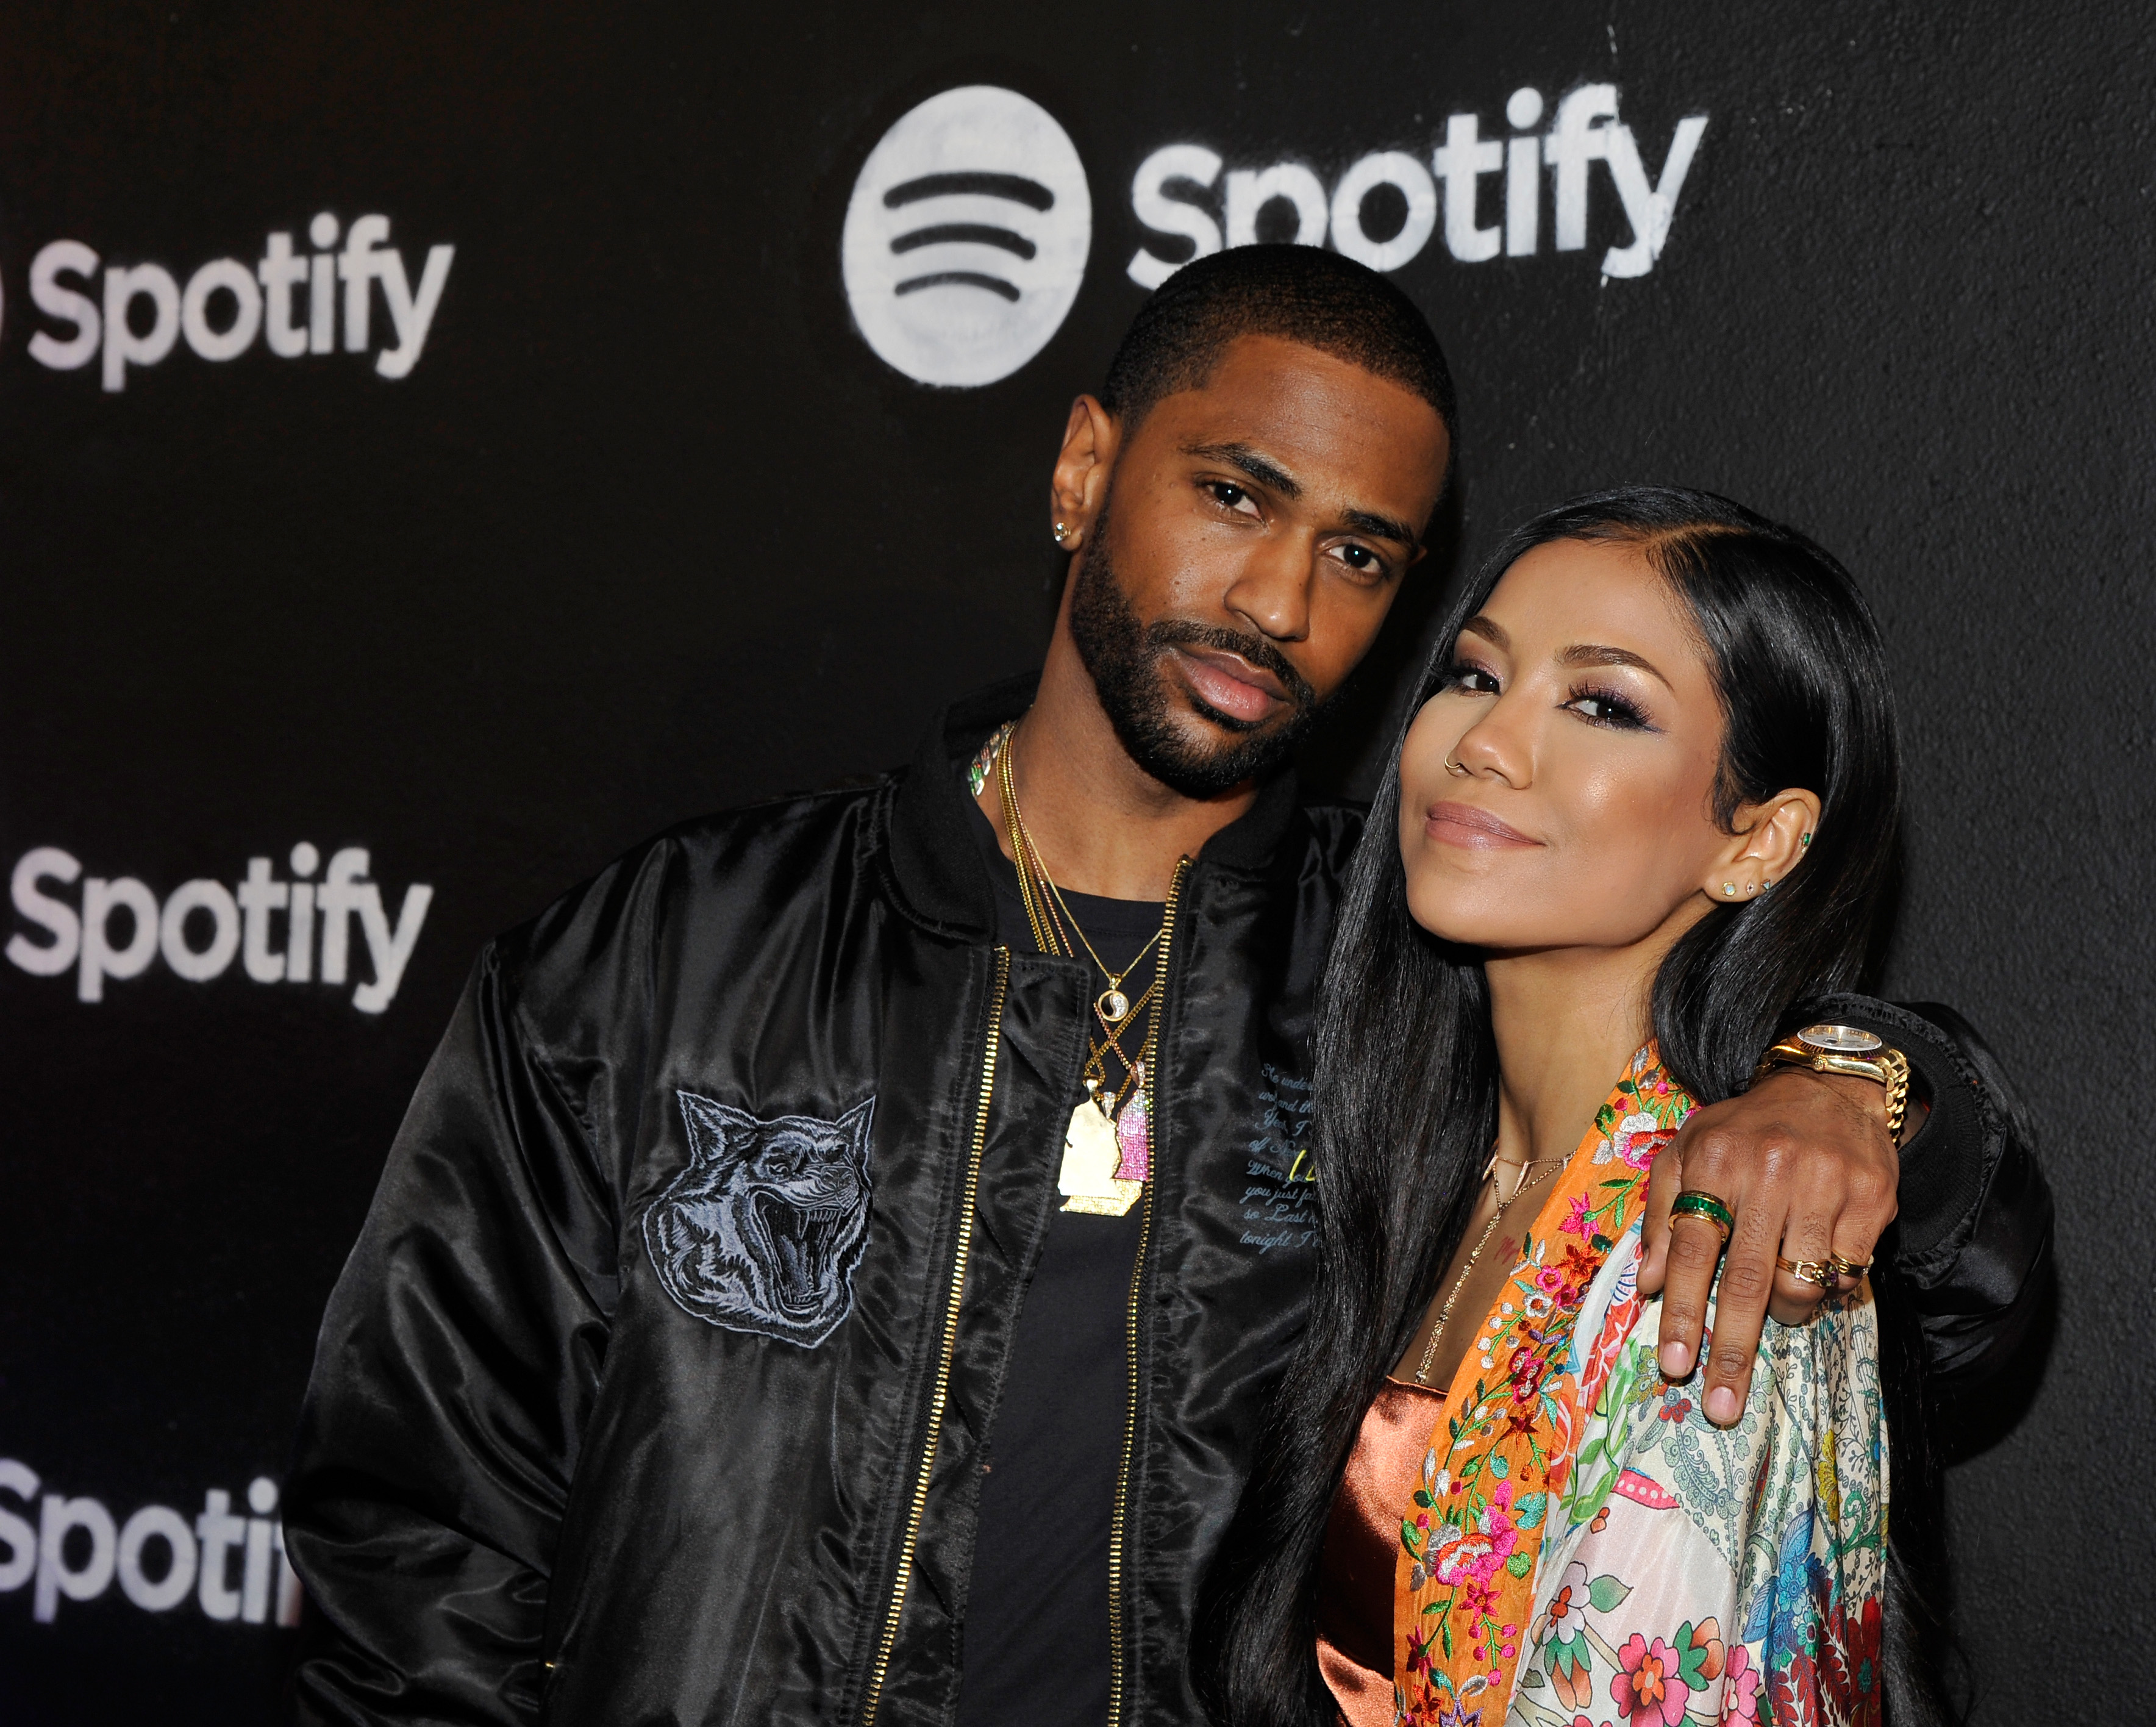 Big Sean On Jhené Aiko Pregnancy: “Can’t Wait To Be A Dad”